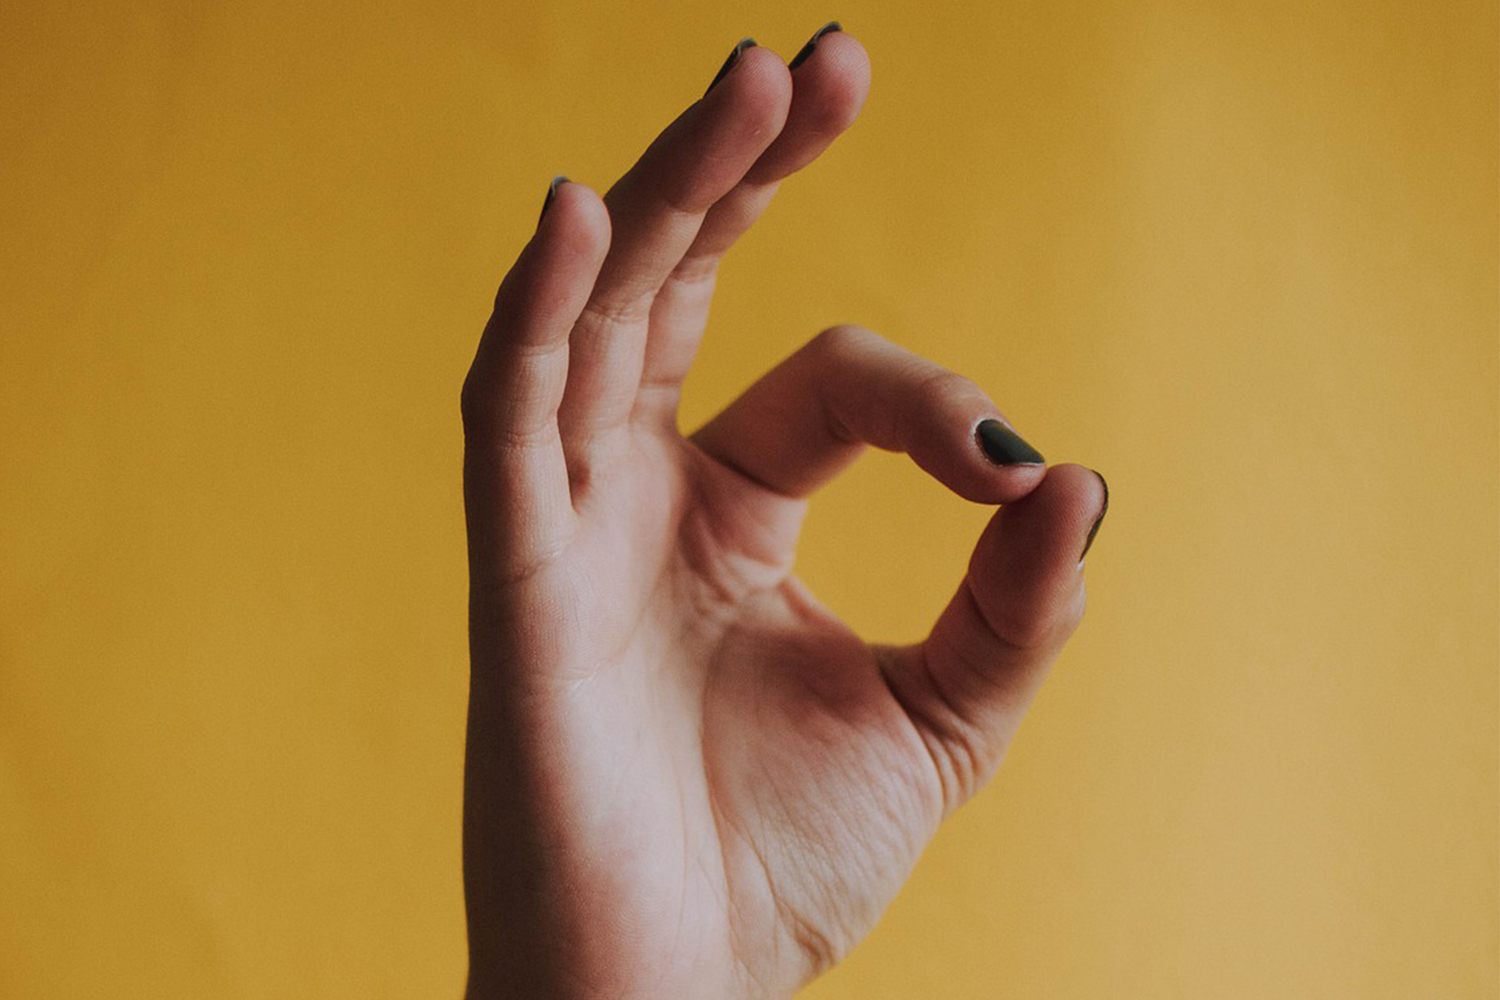 White hand in O-K gesture, with dark green painted fingernails, on yellow background